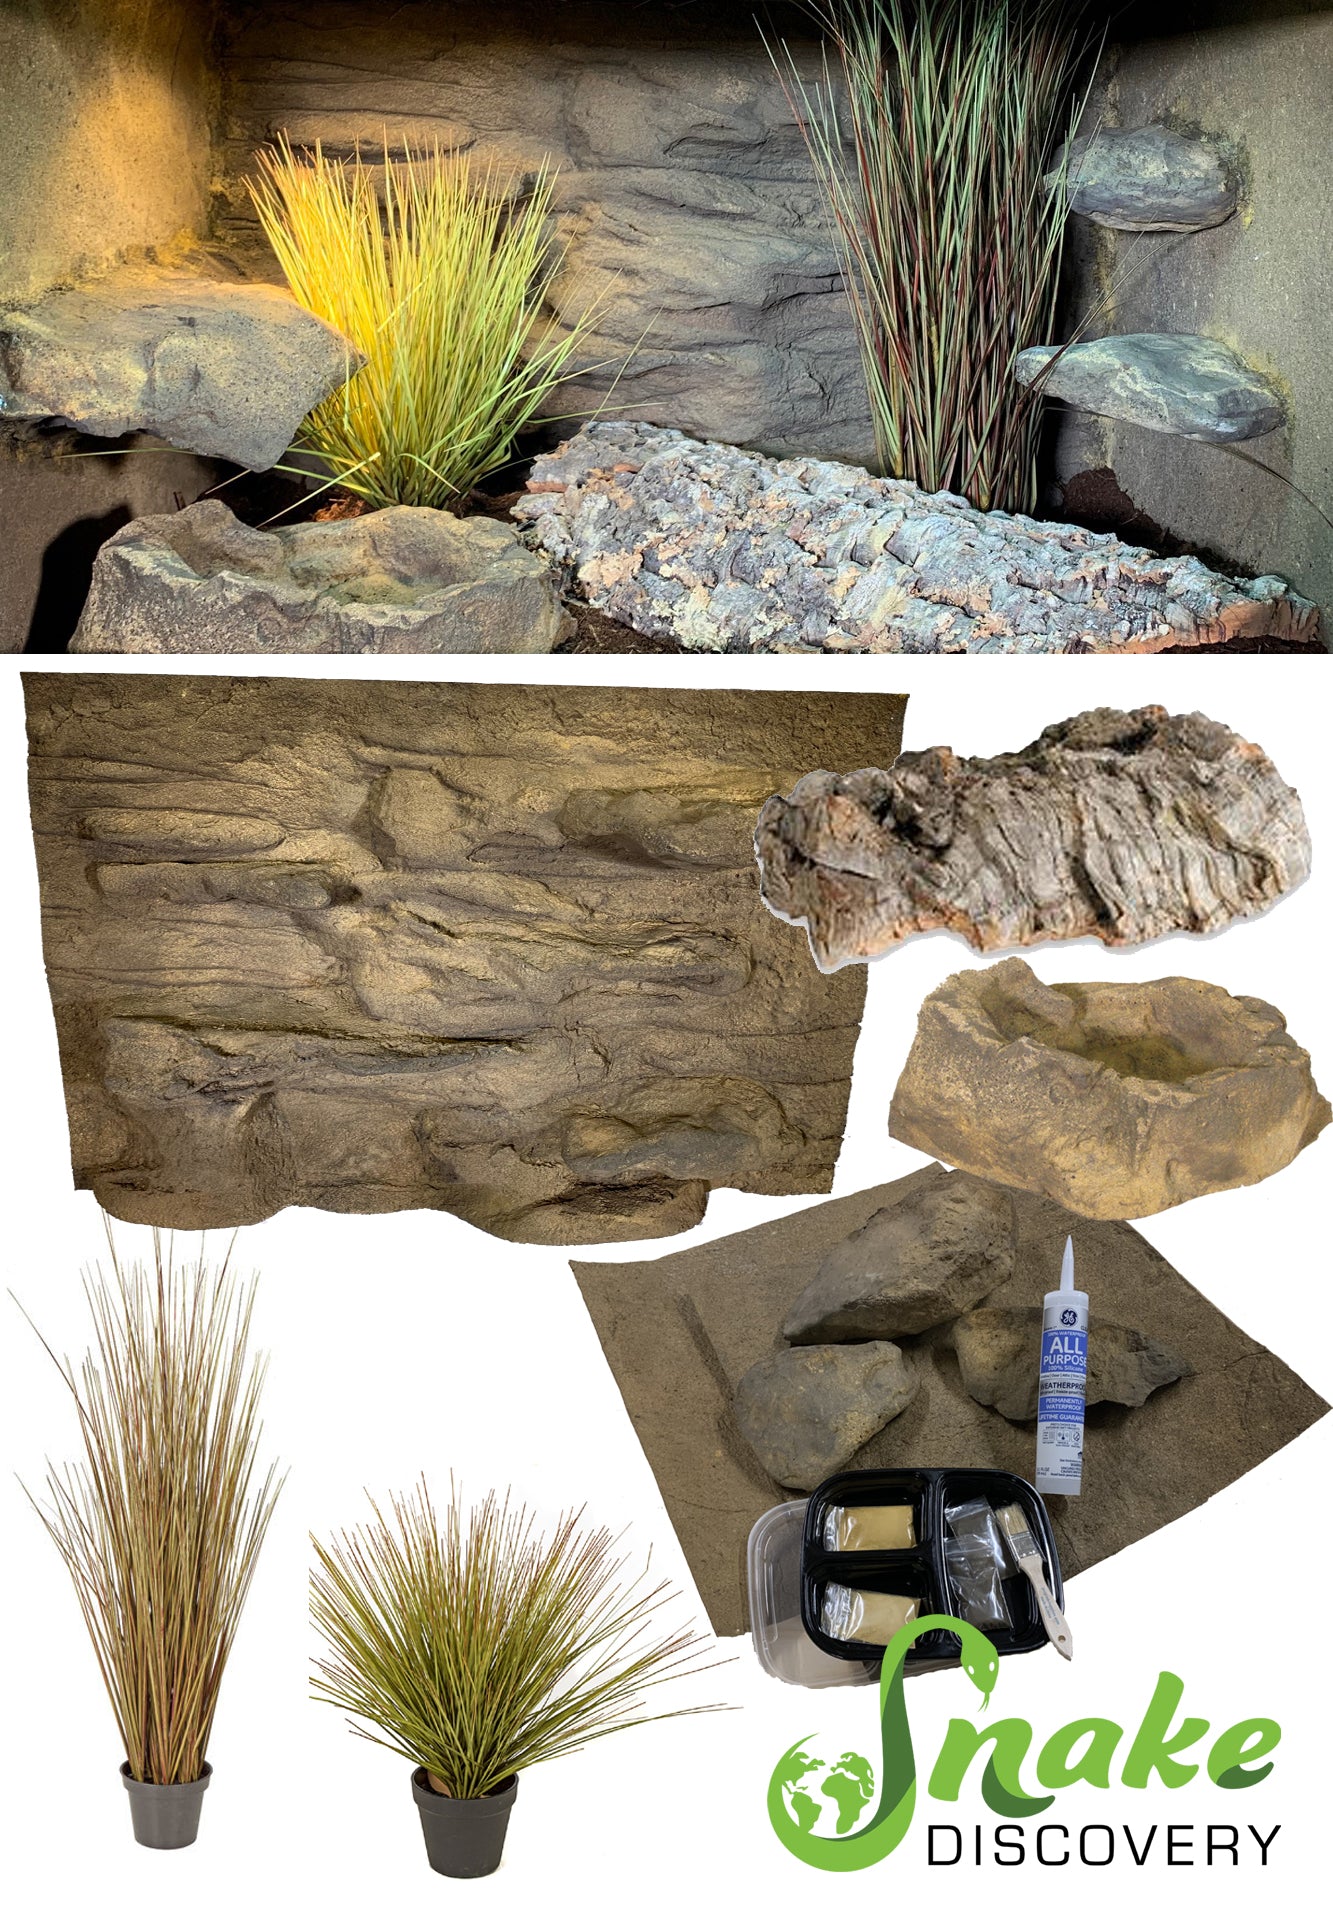 Snake Discovery – 3 Foot Reptile Décor Kit with Plants